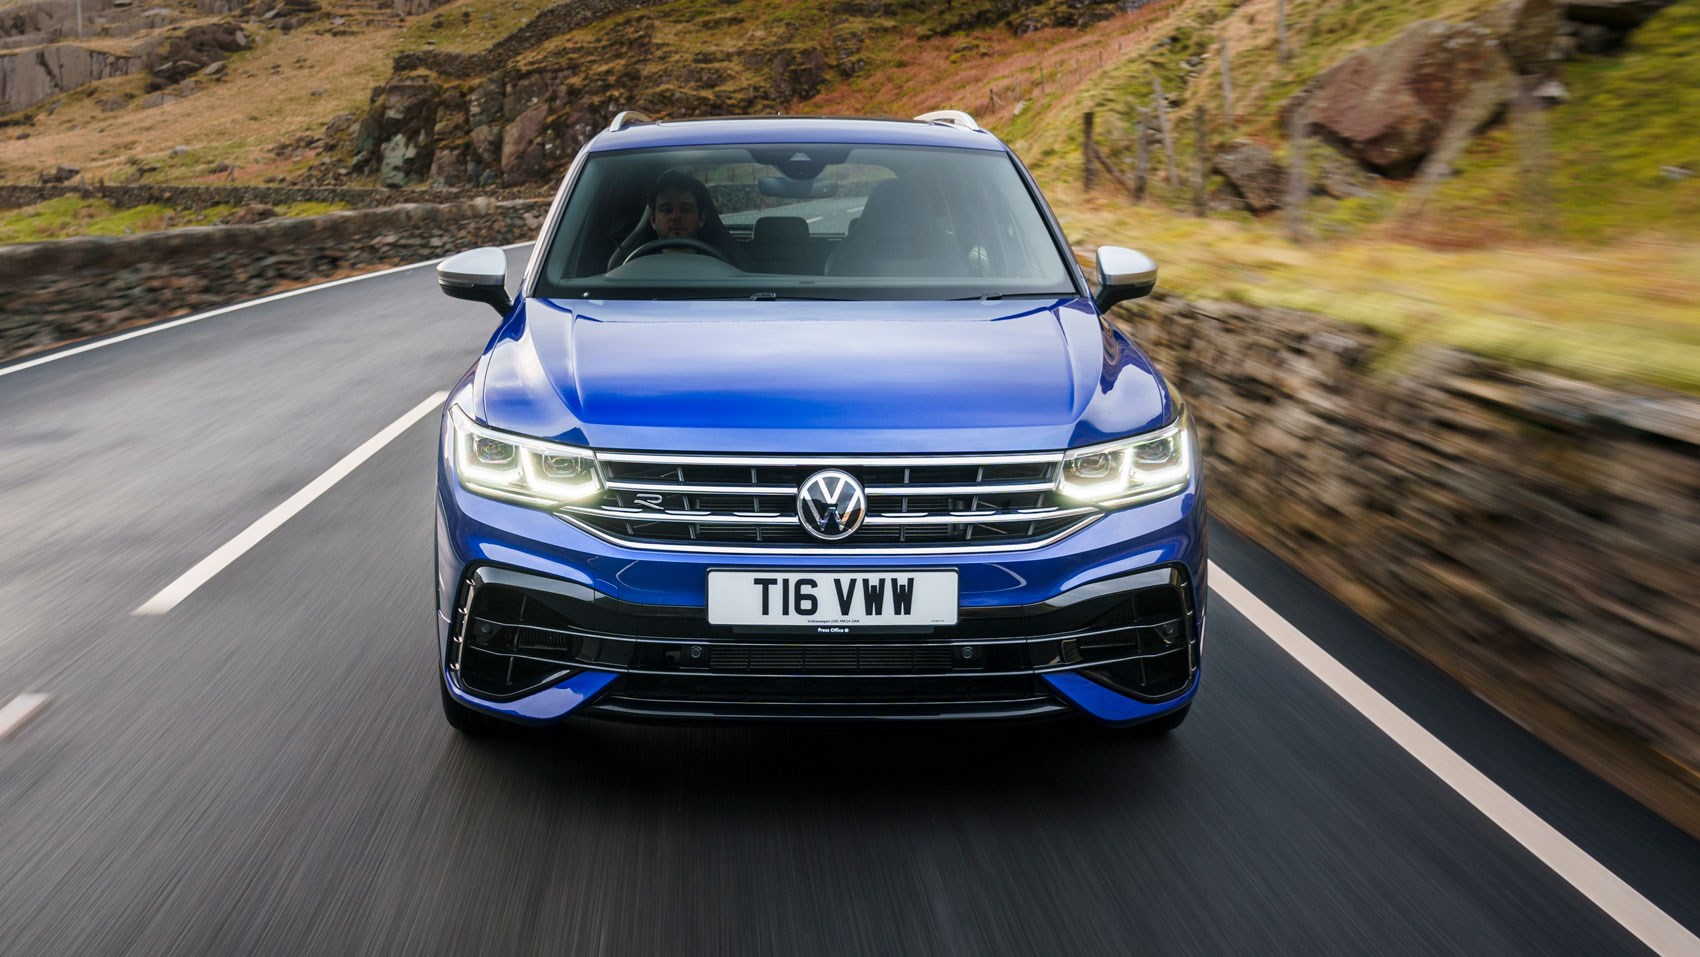 This is the new Volkswagen Tiguan, now the most popular VW in the